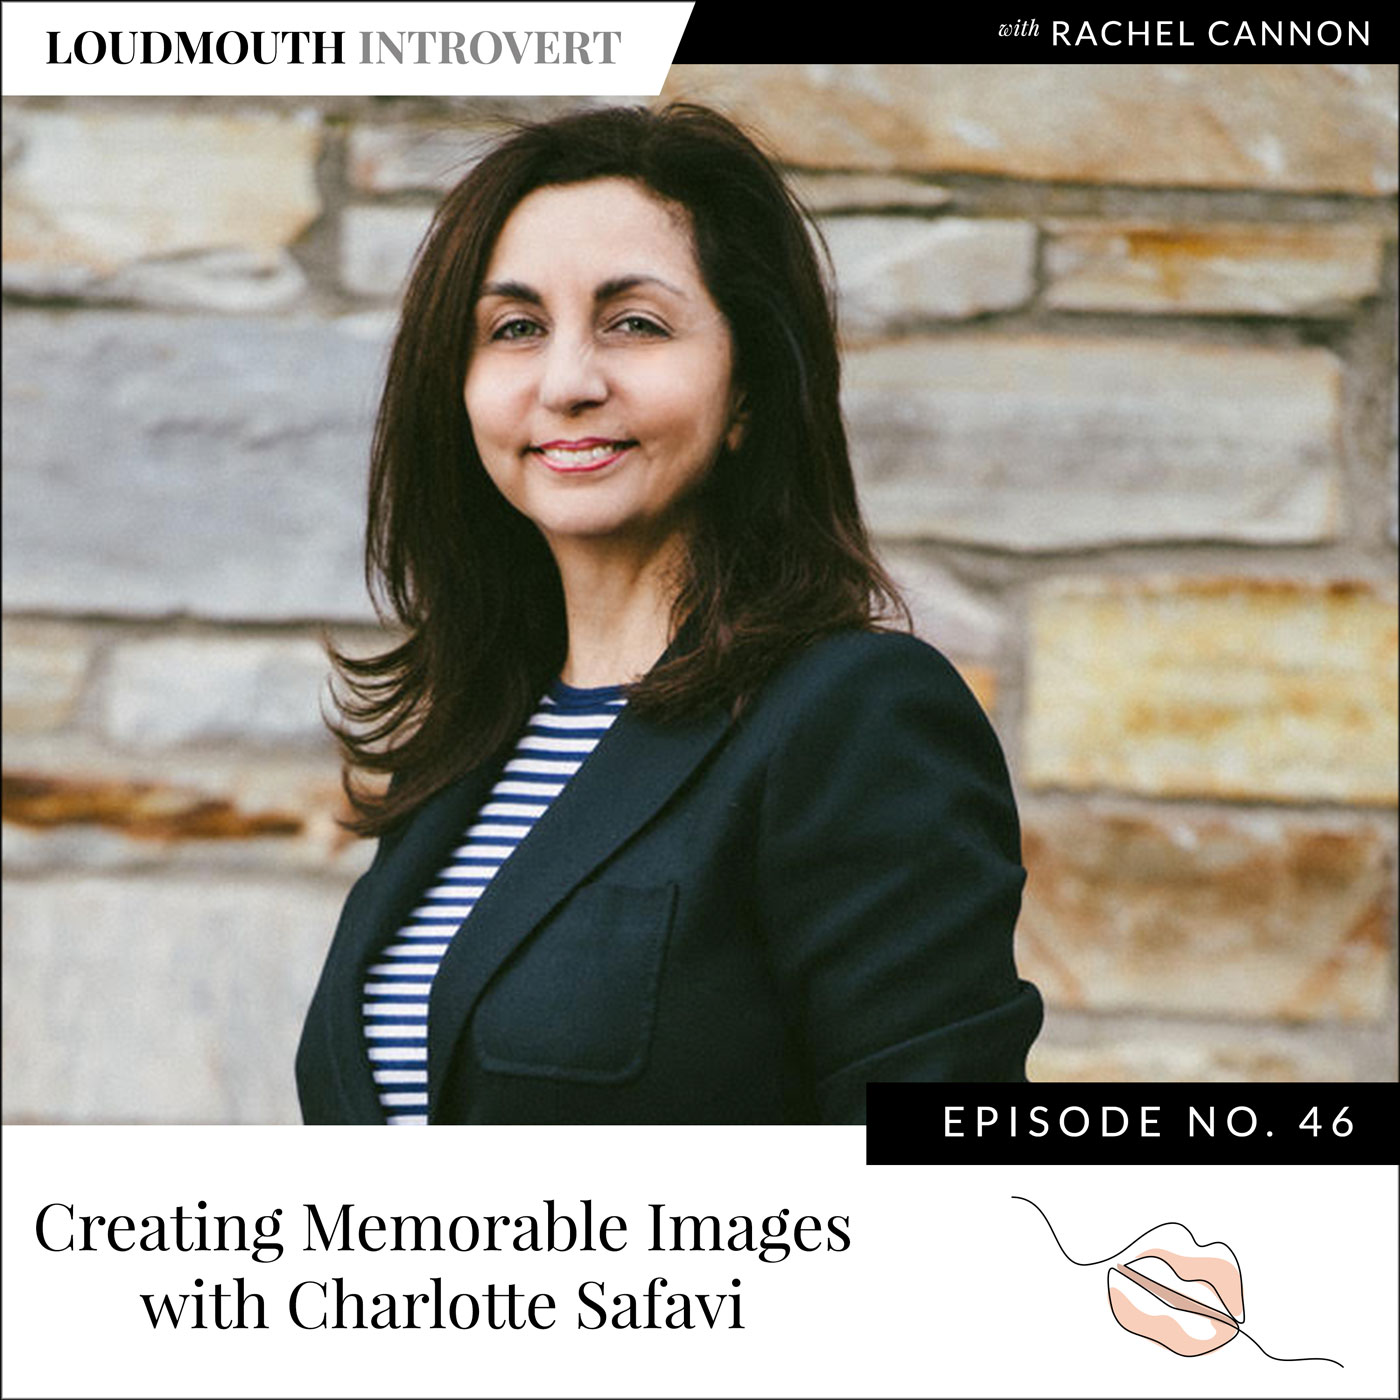 Creating Memorable Images with Charlotte Safavi